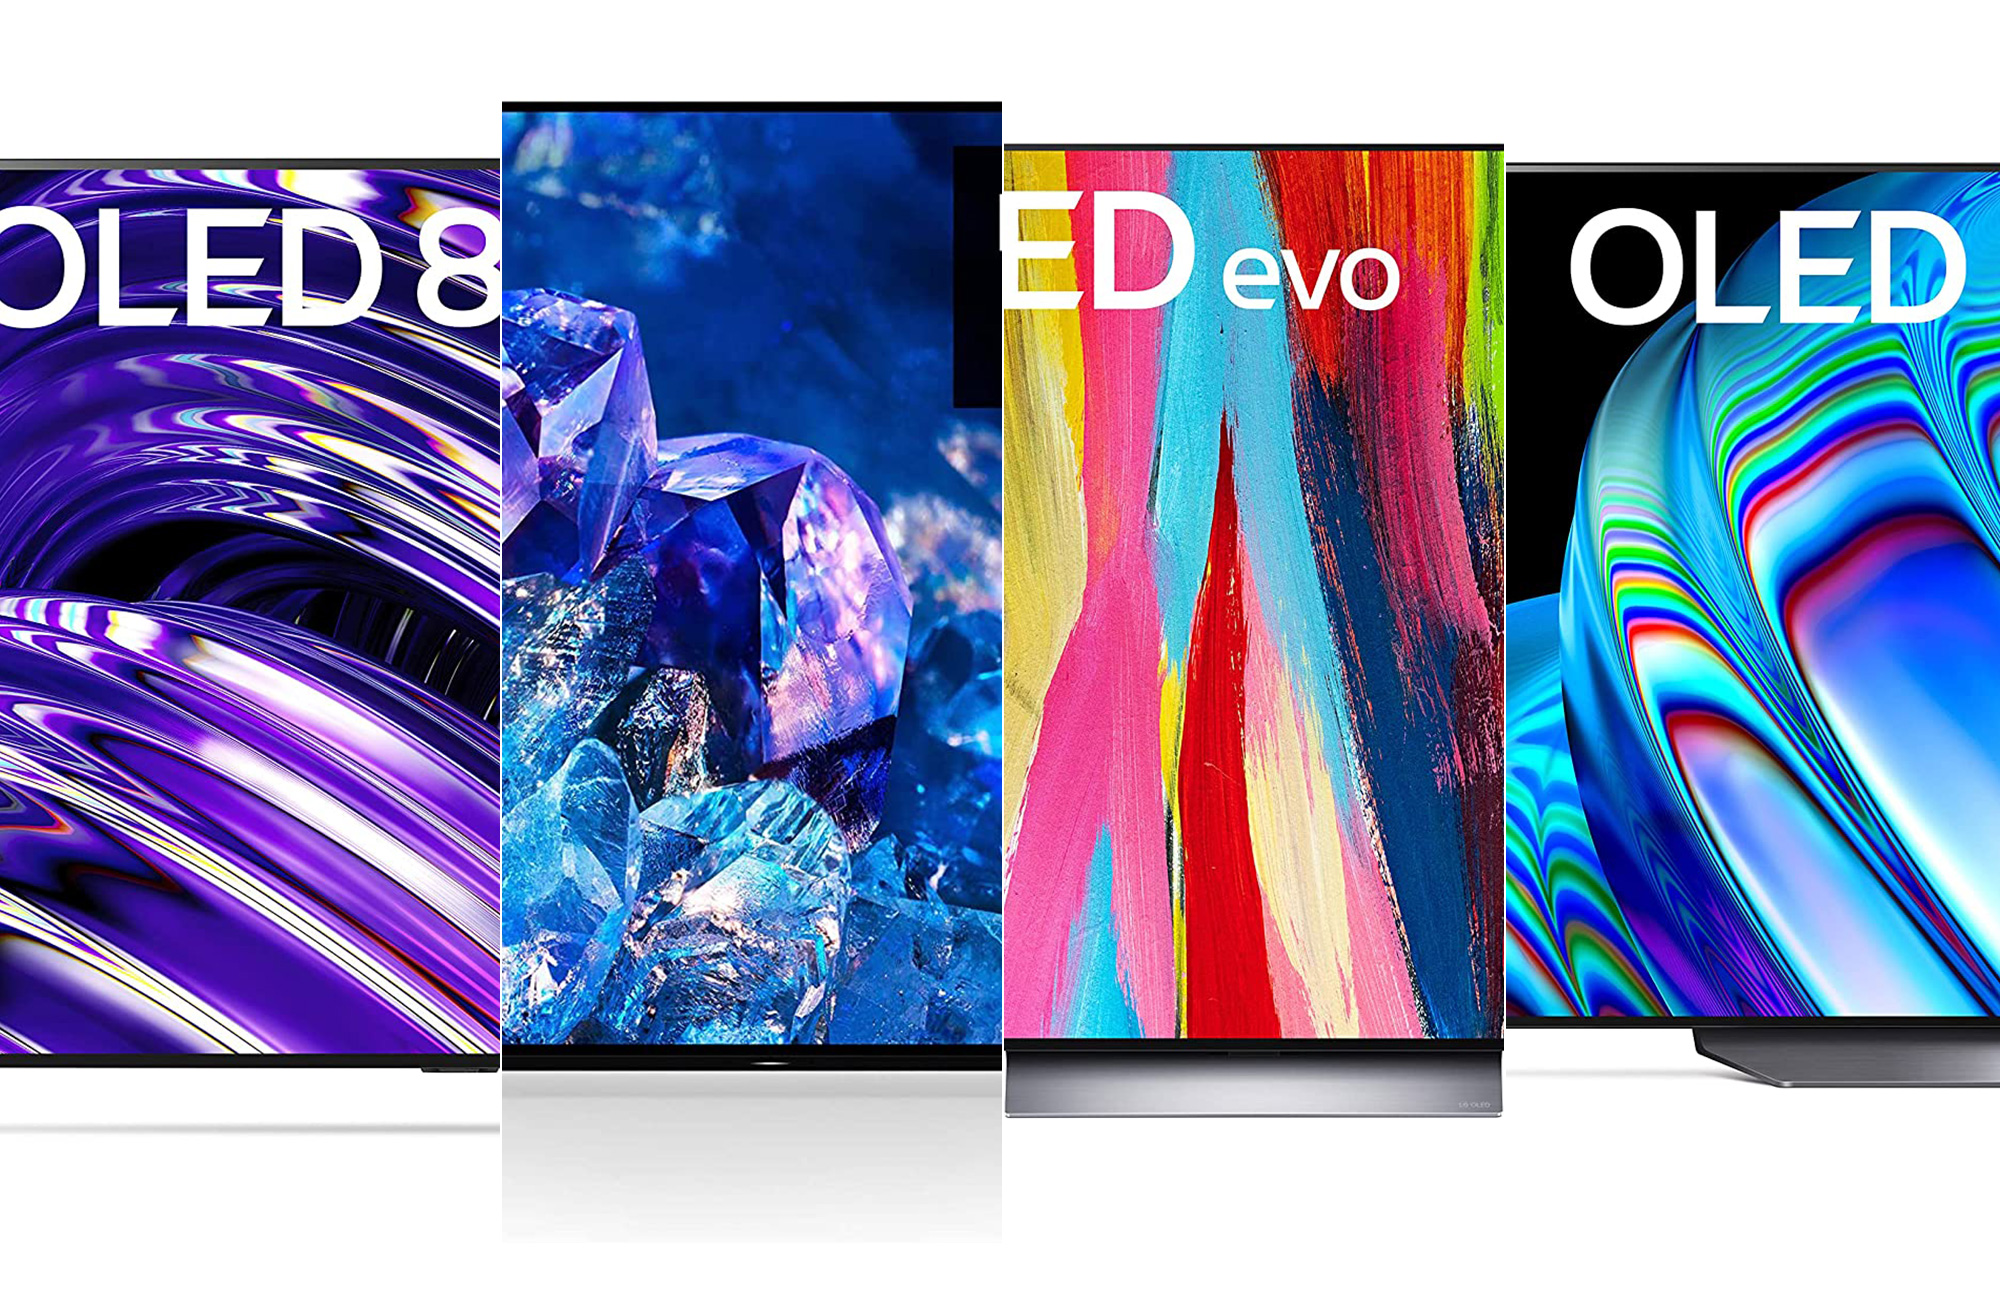 The best OLED TVs composited